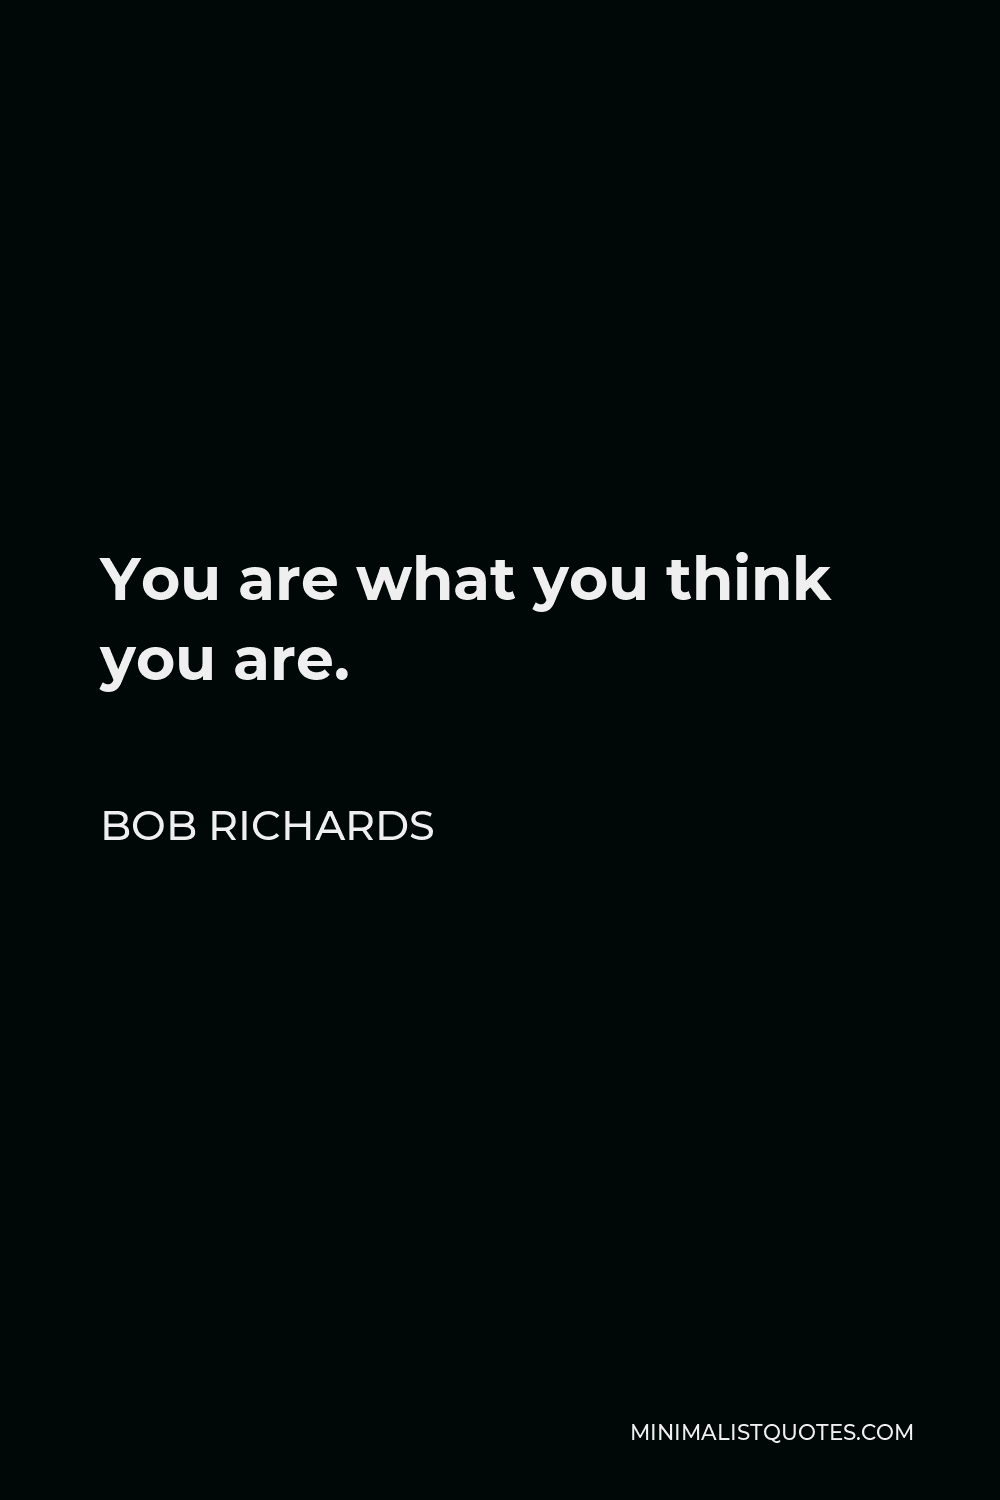 Bob Richards Quote - You are what you think you are.